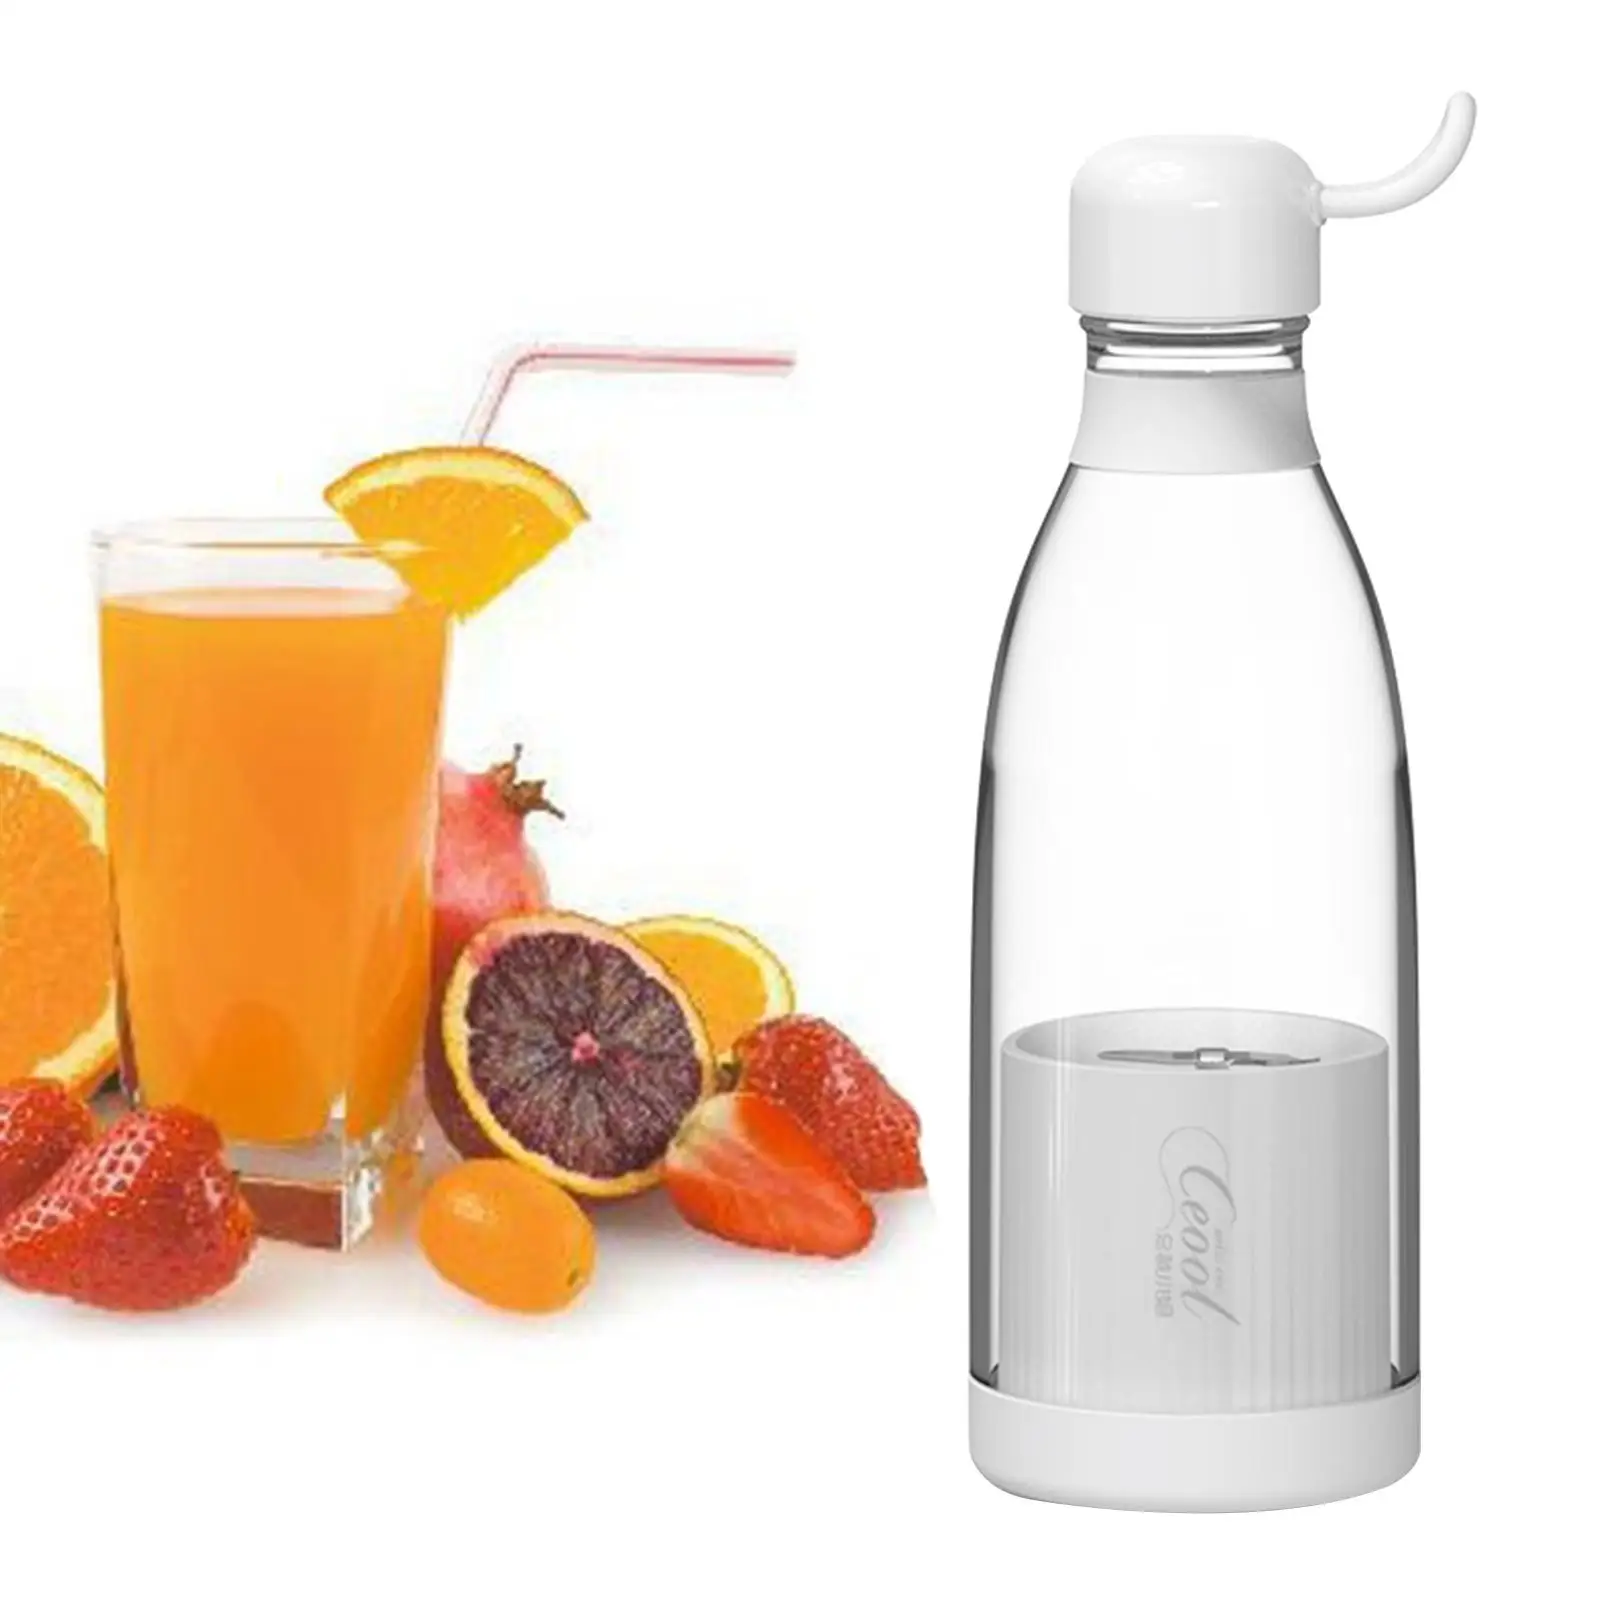 Blender Hand Held Food Grade PC White Removable for Smoothies Camping Nuts